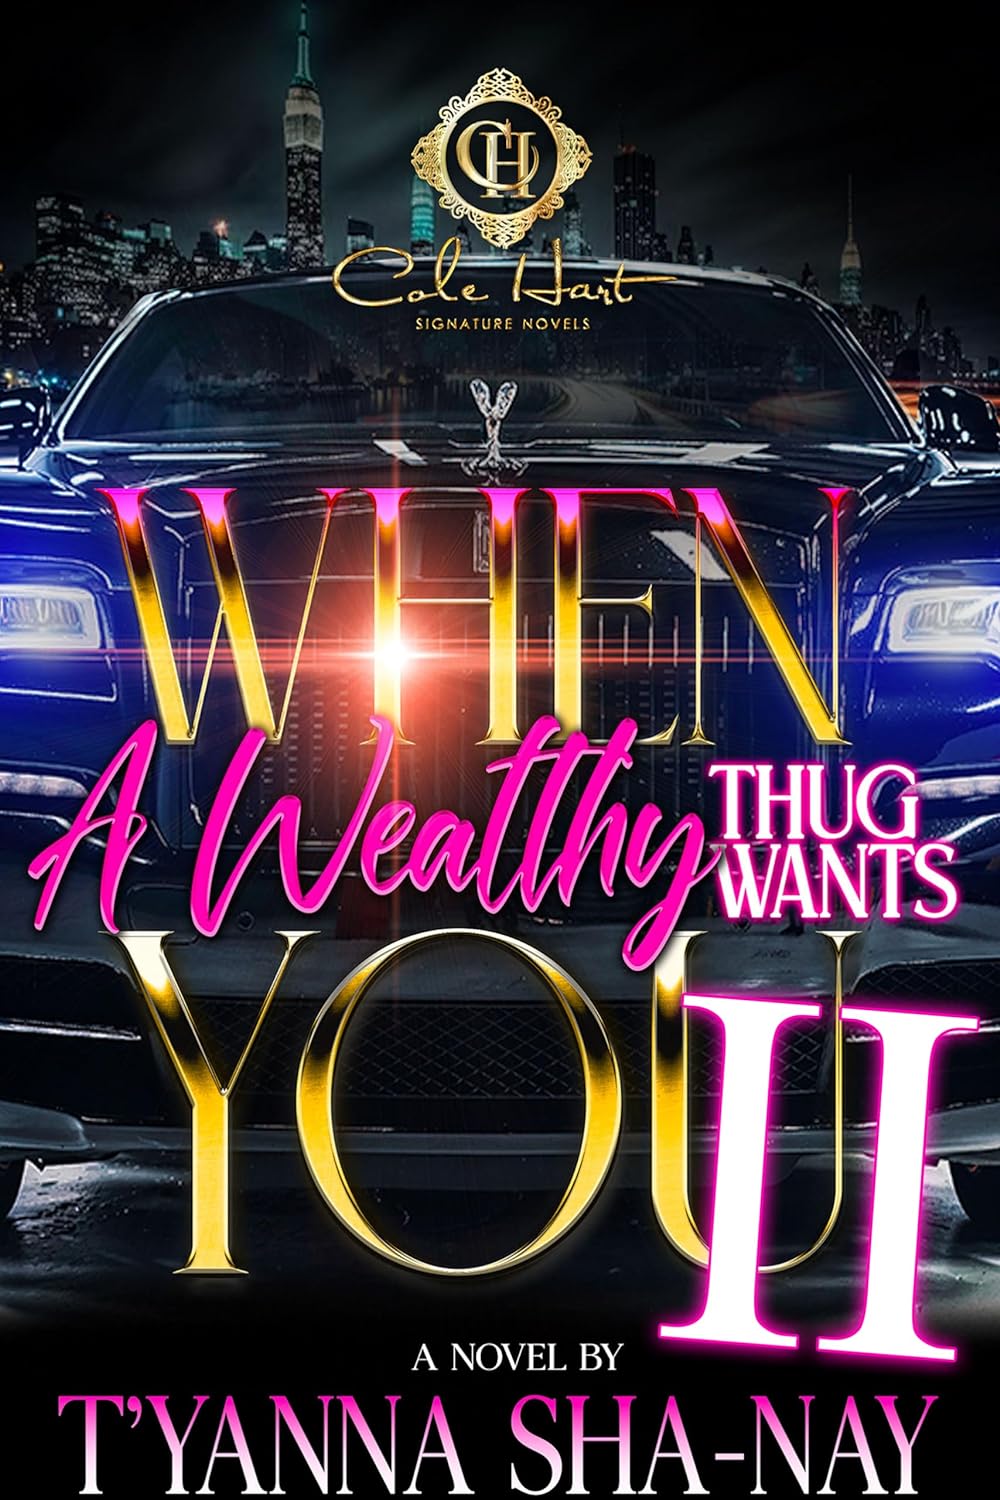 When A Wealthy Thug Wants You 2: An African American Romance (When a Wealthy Thug Wants You #2) - CA Corrections Book Store